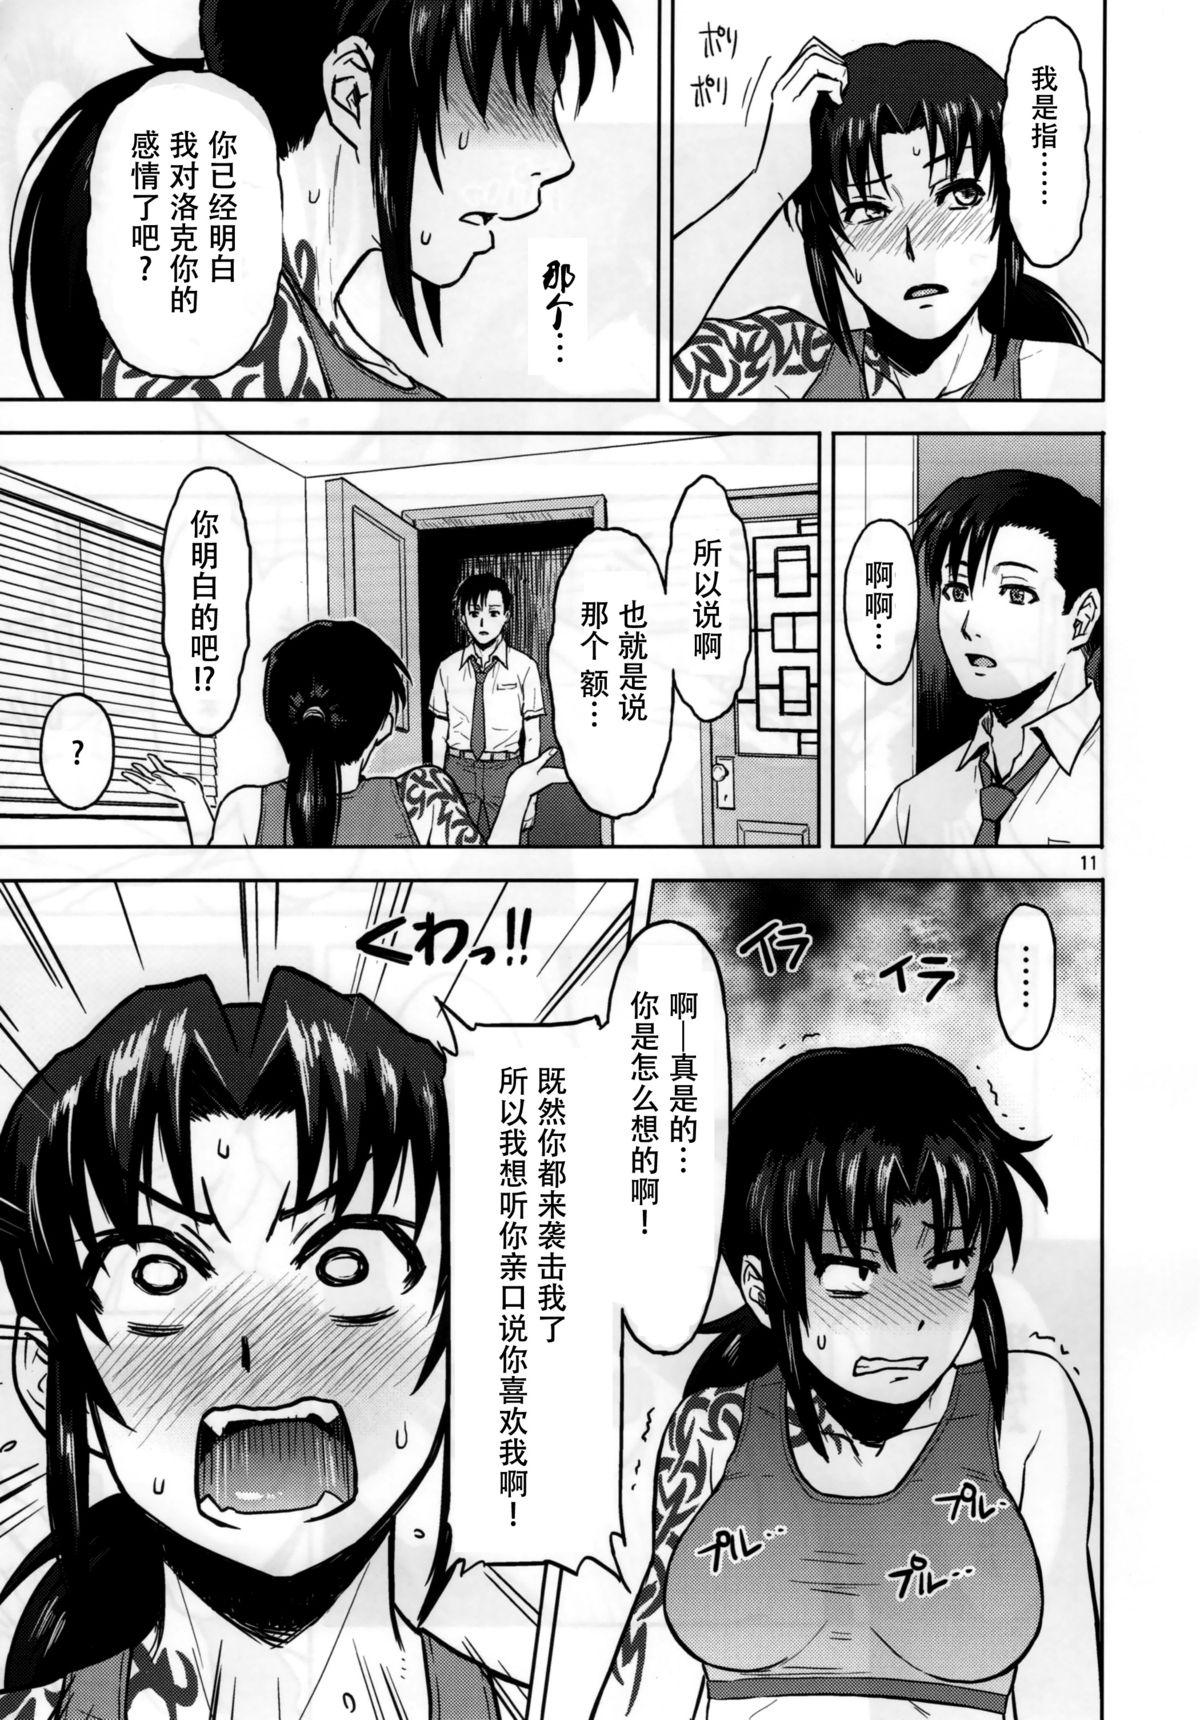 Super Sick from drinking - Black lagoon Hidden Cam - Page 12